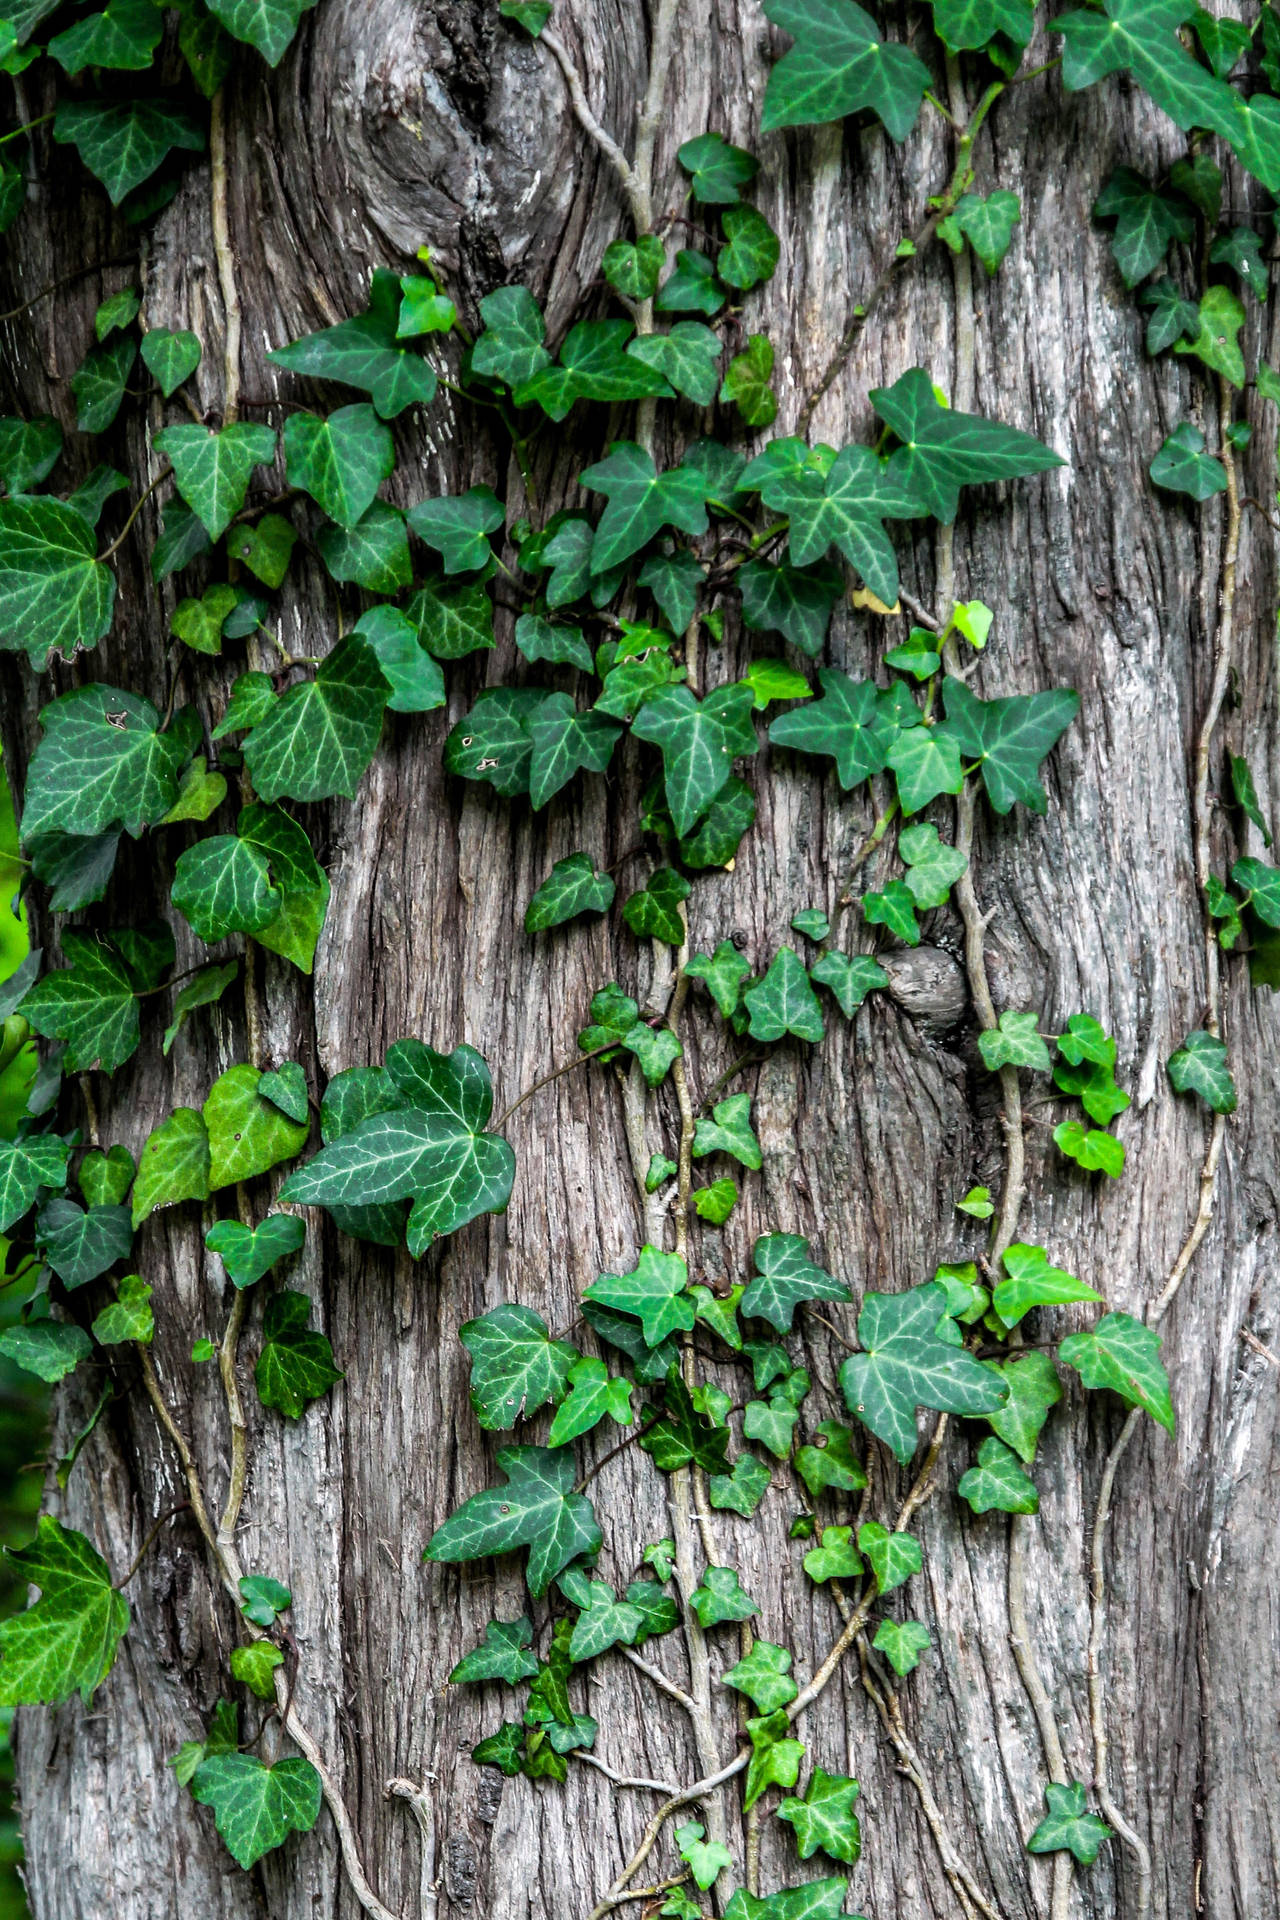 Caption: Tranquil Green Leaves On Vines Background